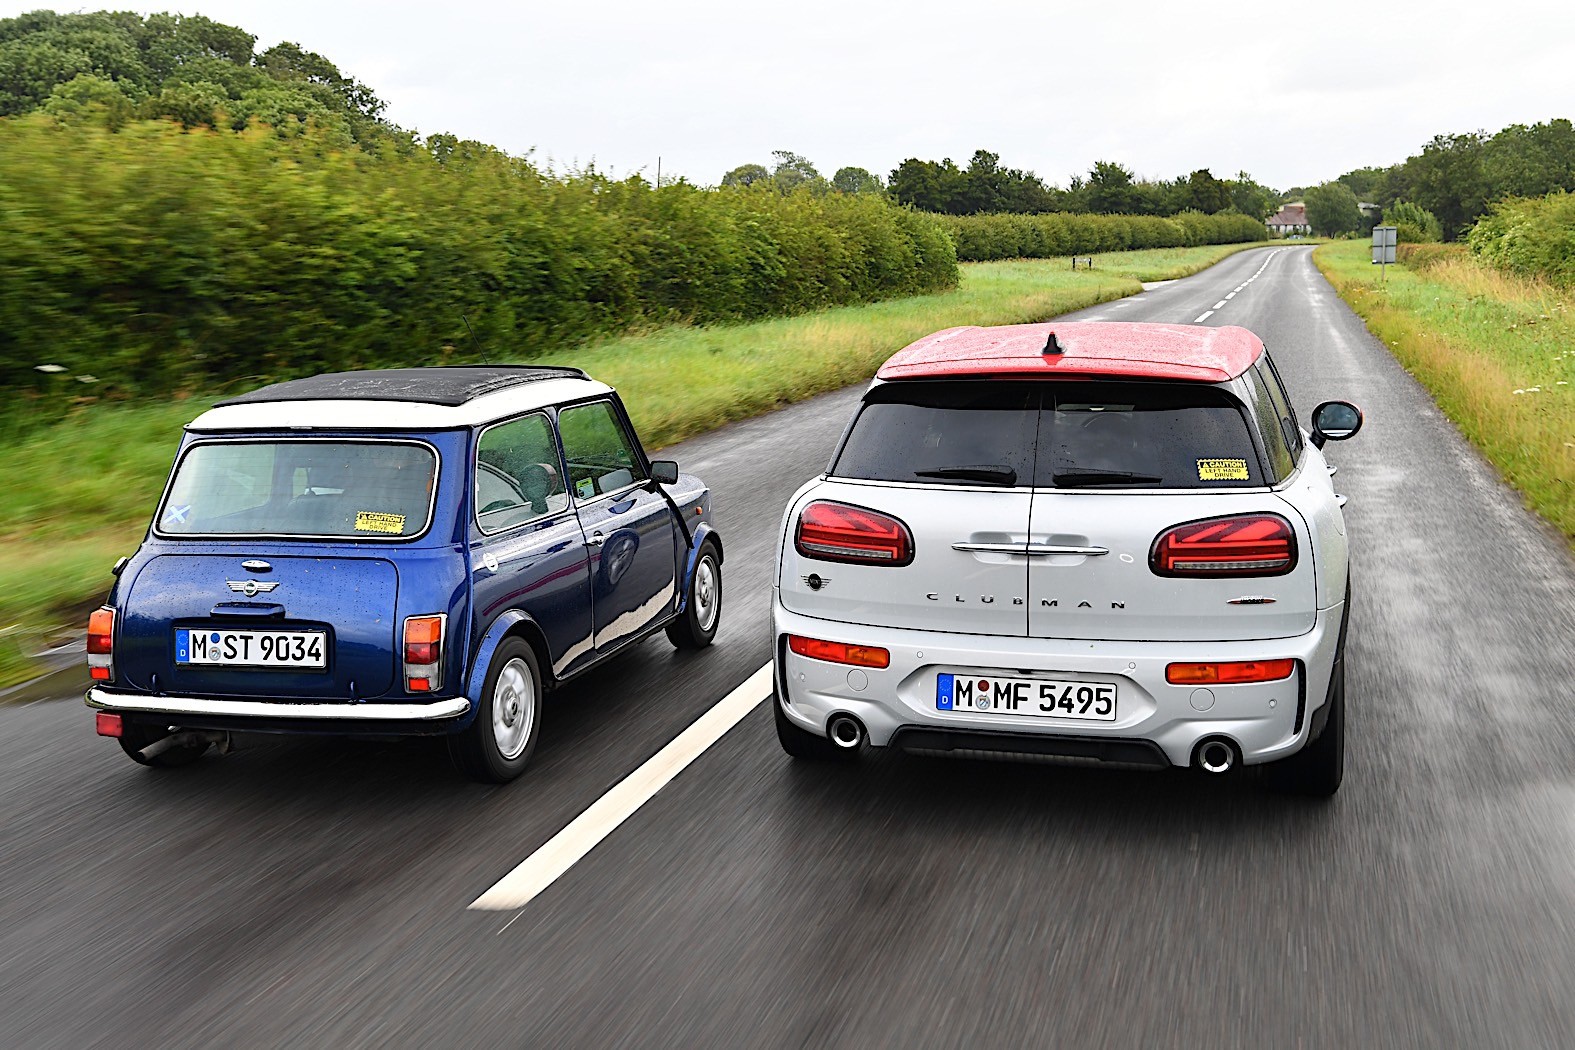 MINI Had a Monster Party in the UK, Photos Prove It - autoevolution